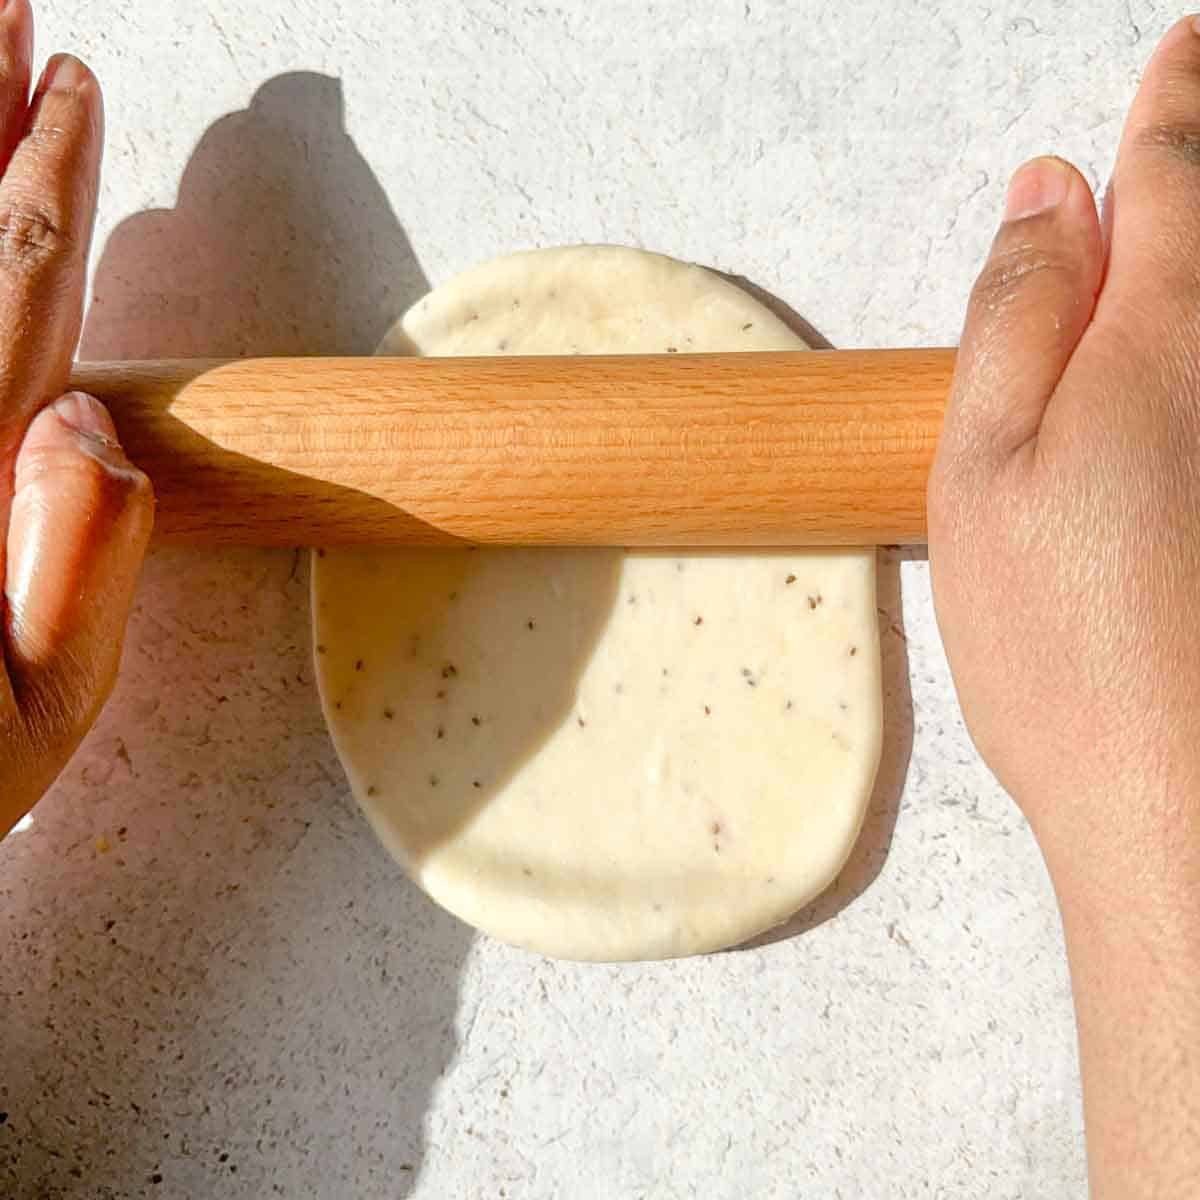 Samosa dough being rolled into a semi circle